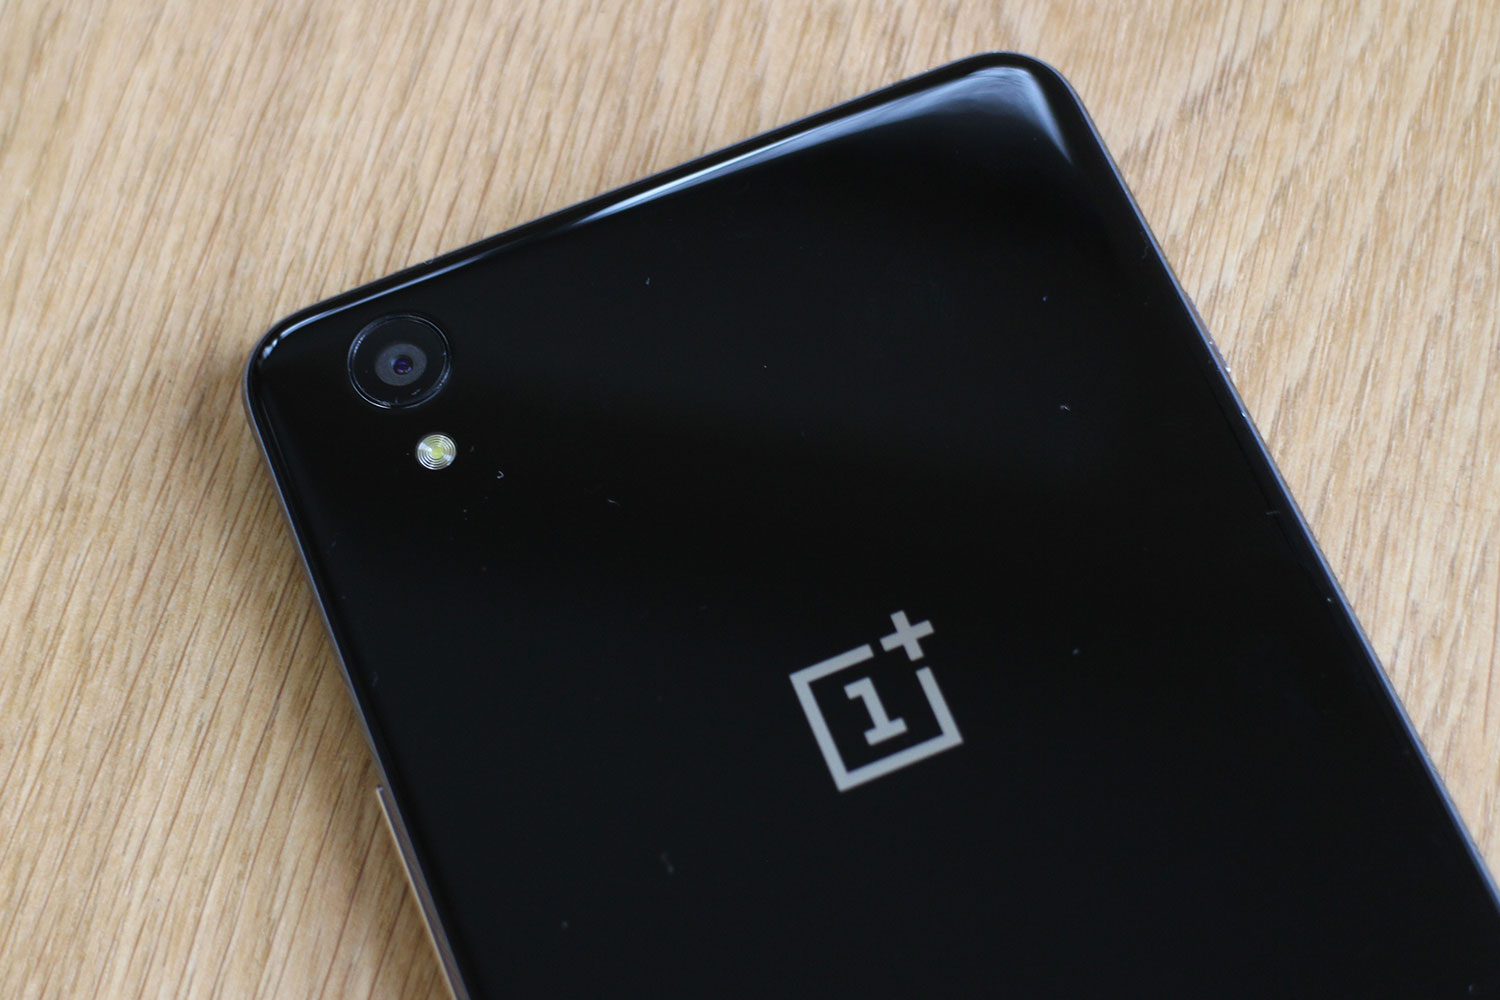 The News about OnePlus 3 was affirmed by the Co-founder of OnePlus